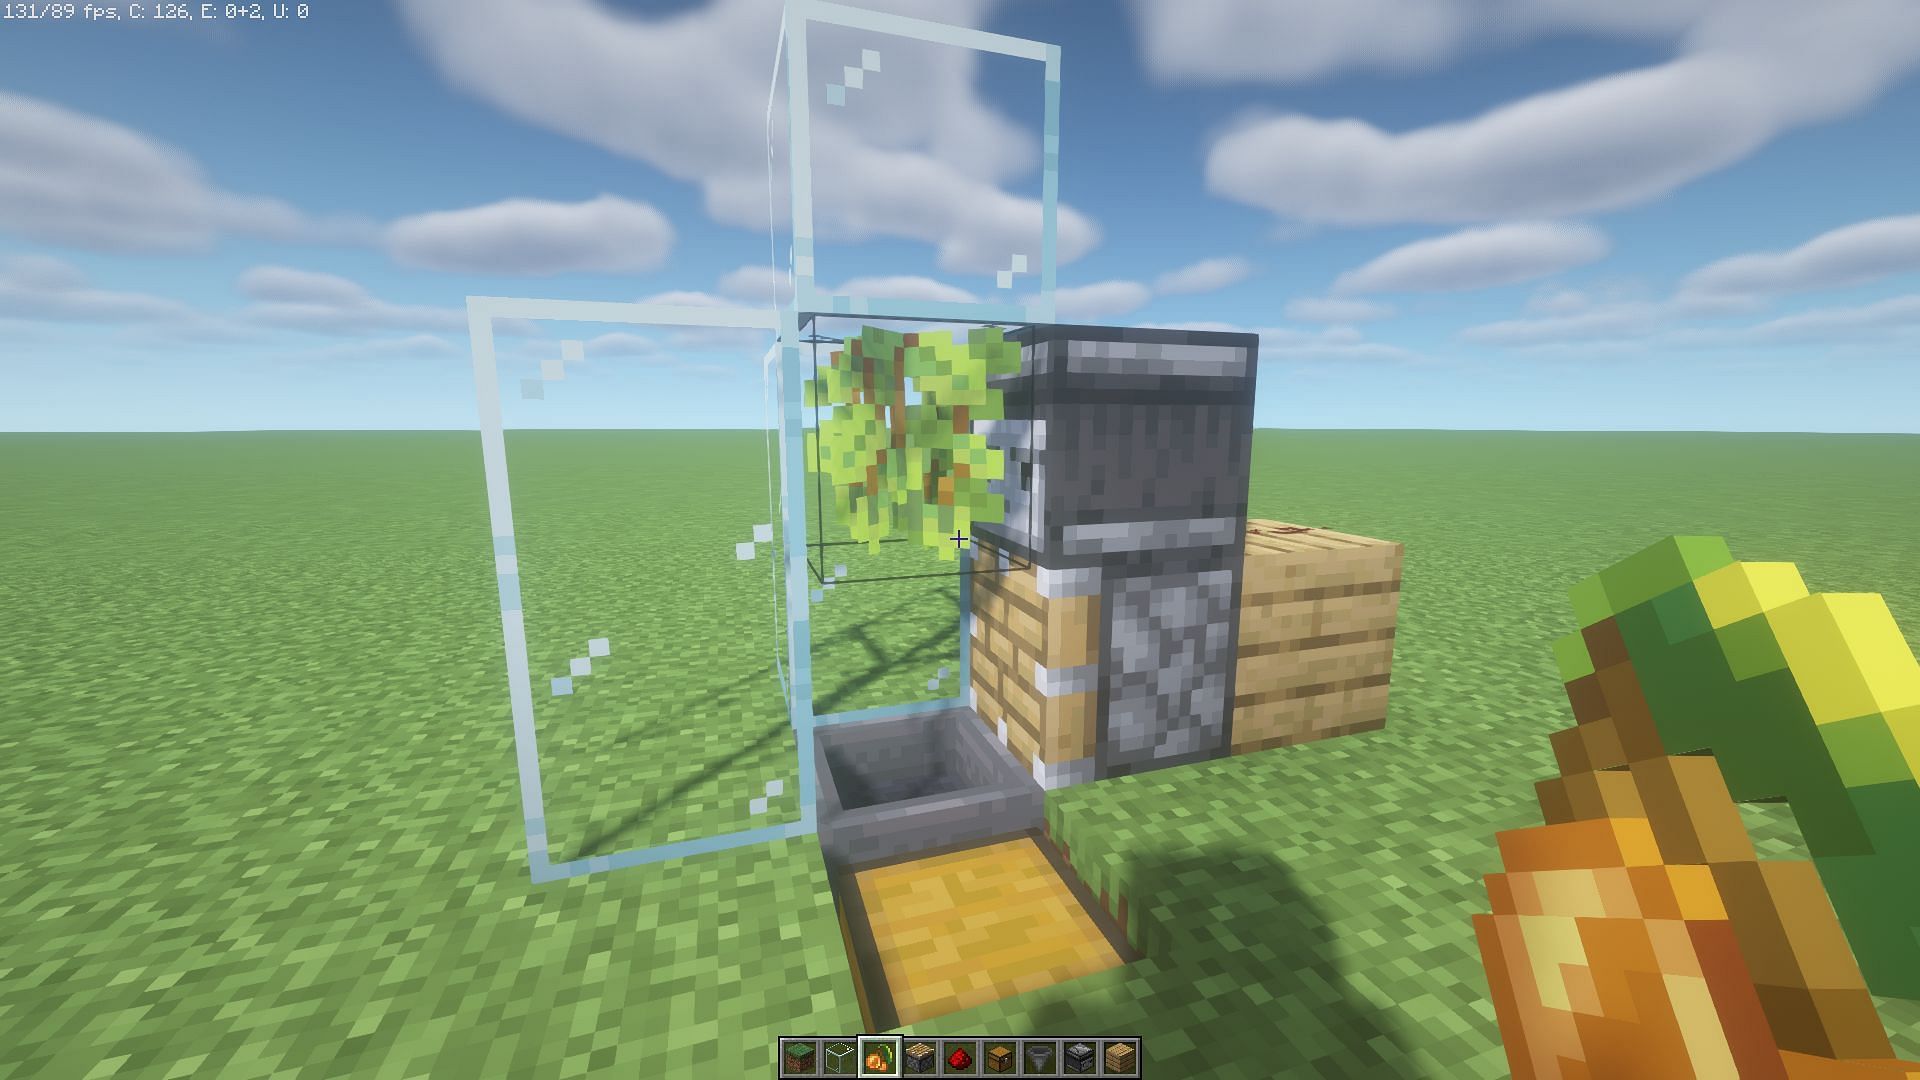 Place glow berries in front of observer and piston (Image via Mojang)